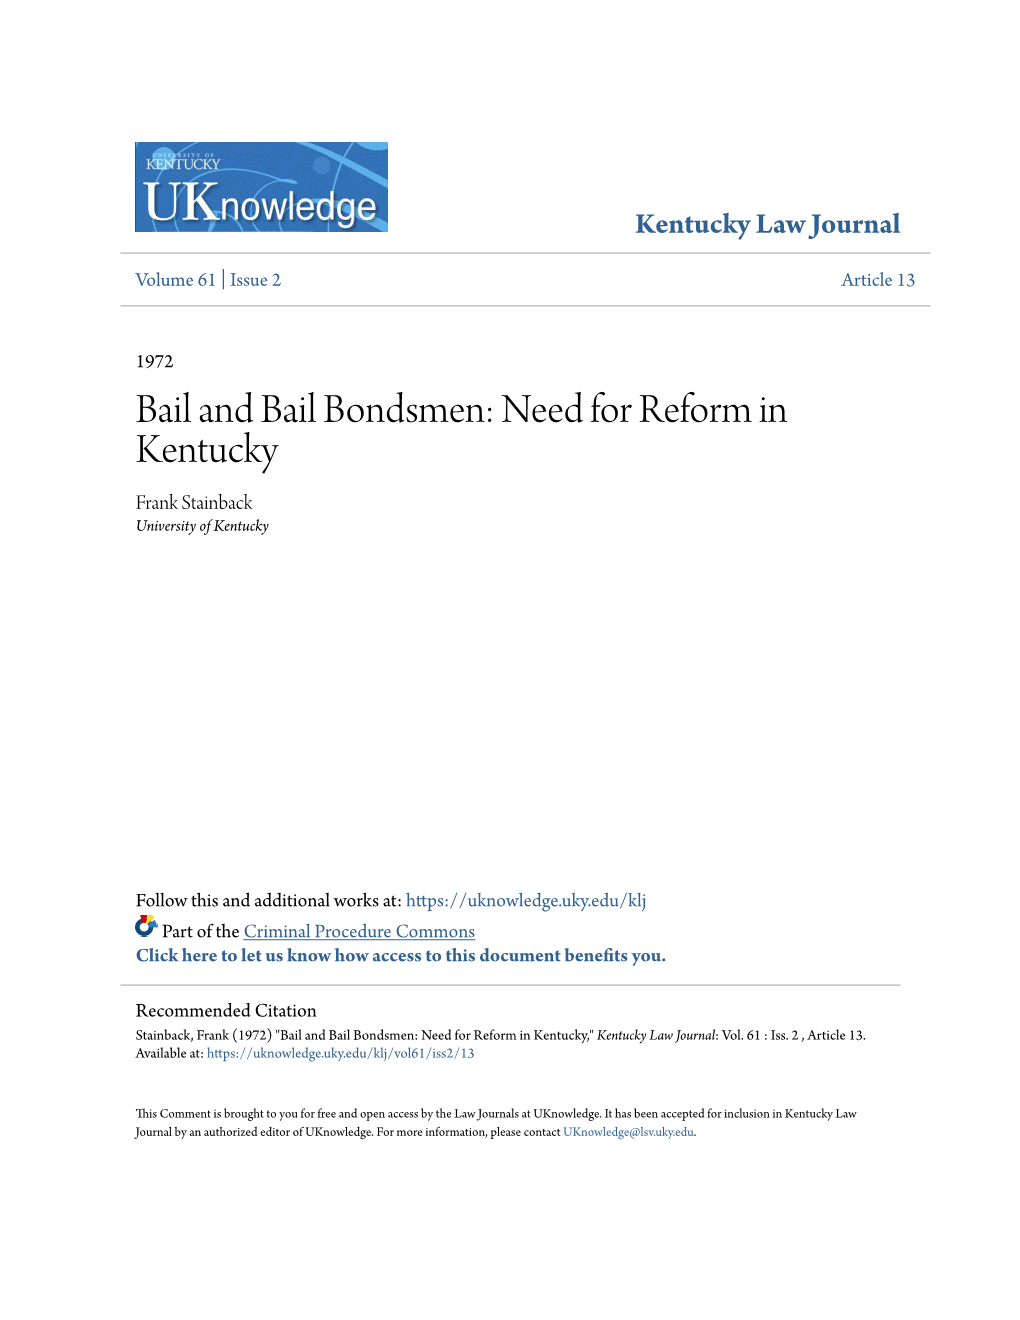 Bail and Bail Bondsmen: Need for Reform in Kentucky Frank Stainback University of Kentucky